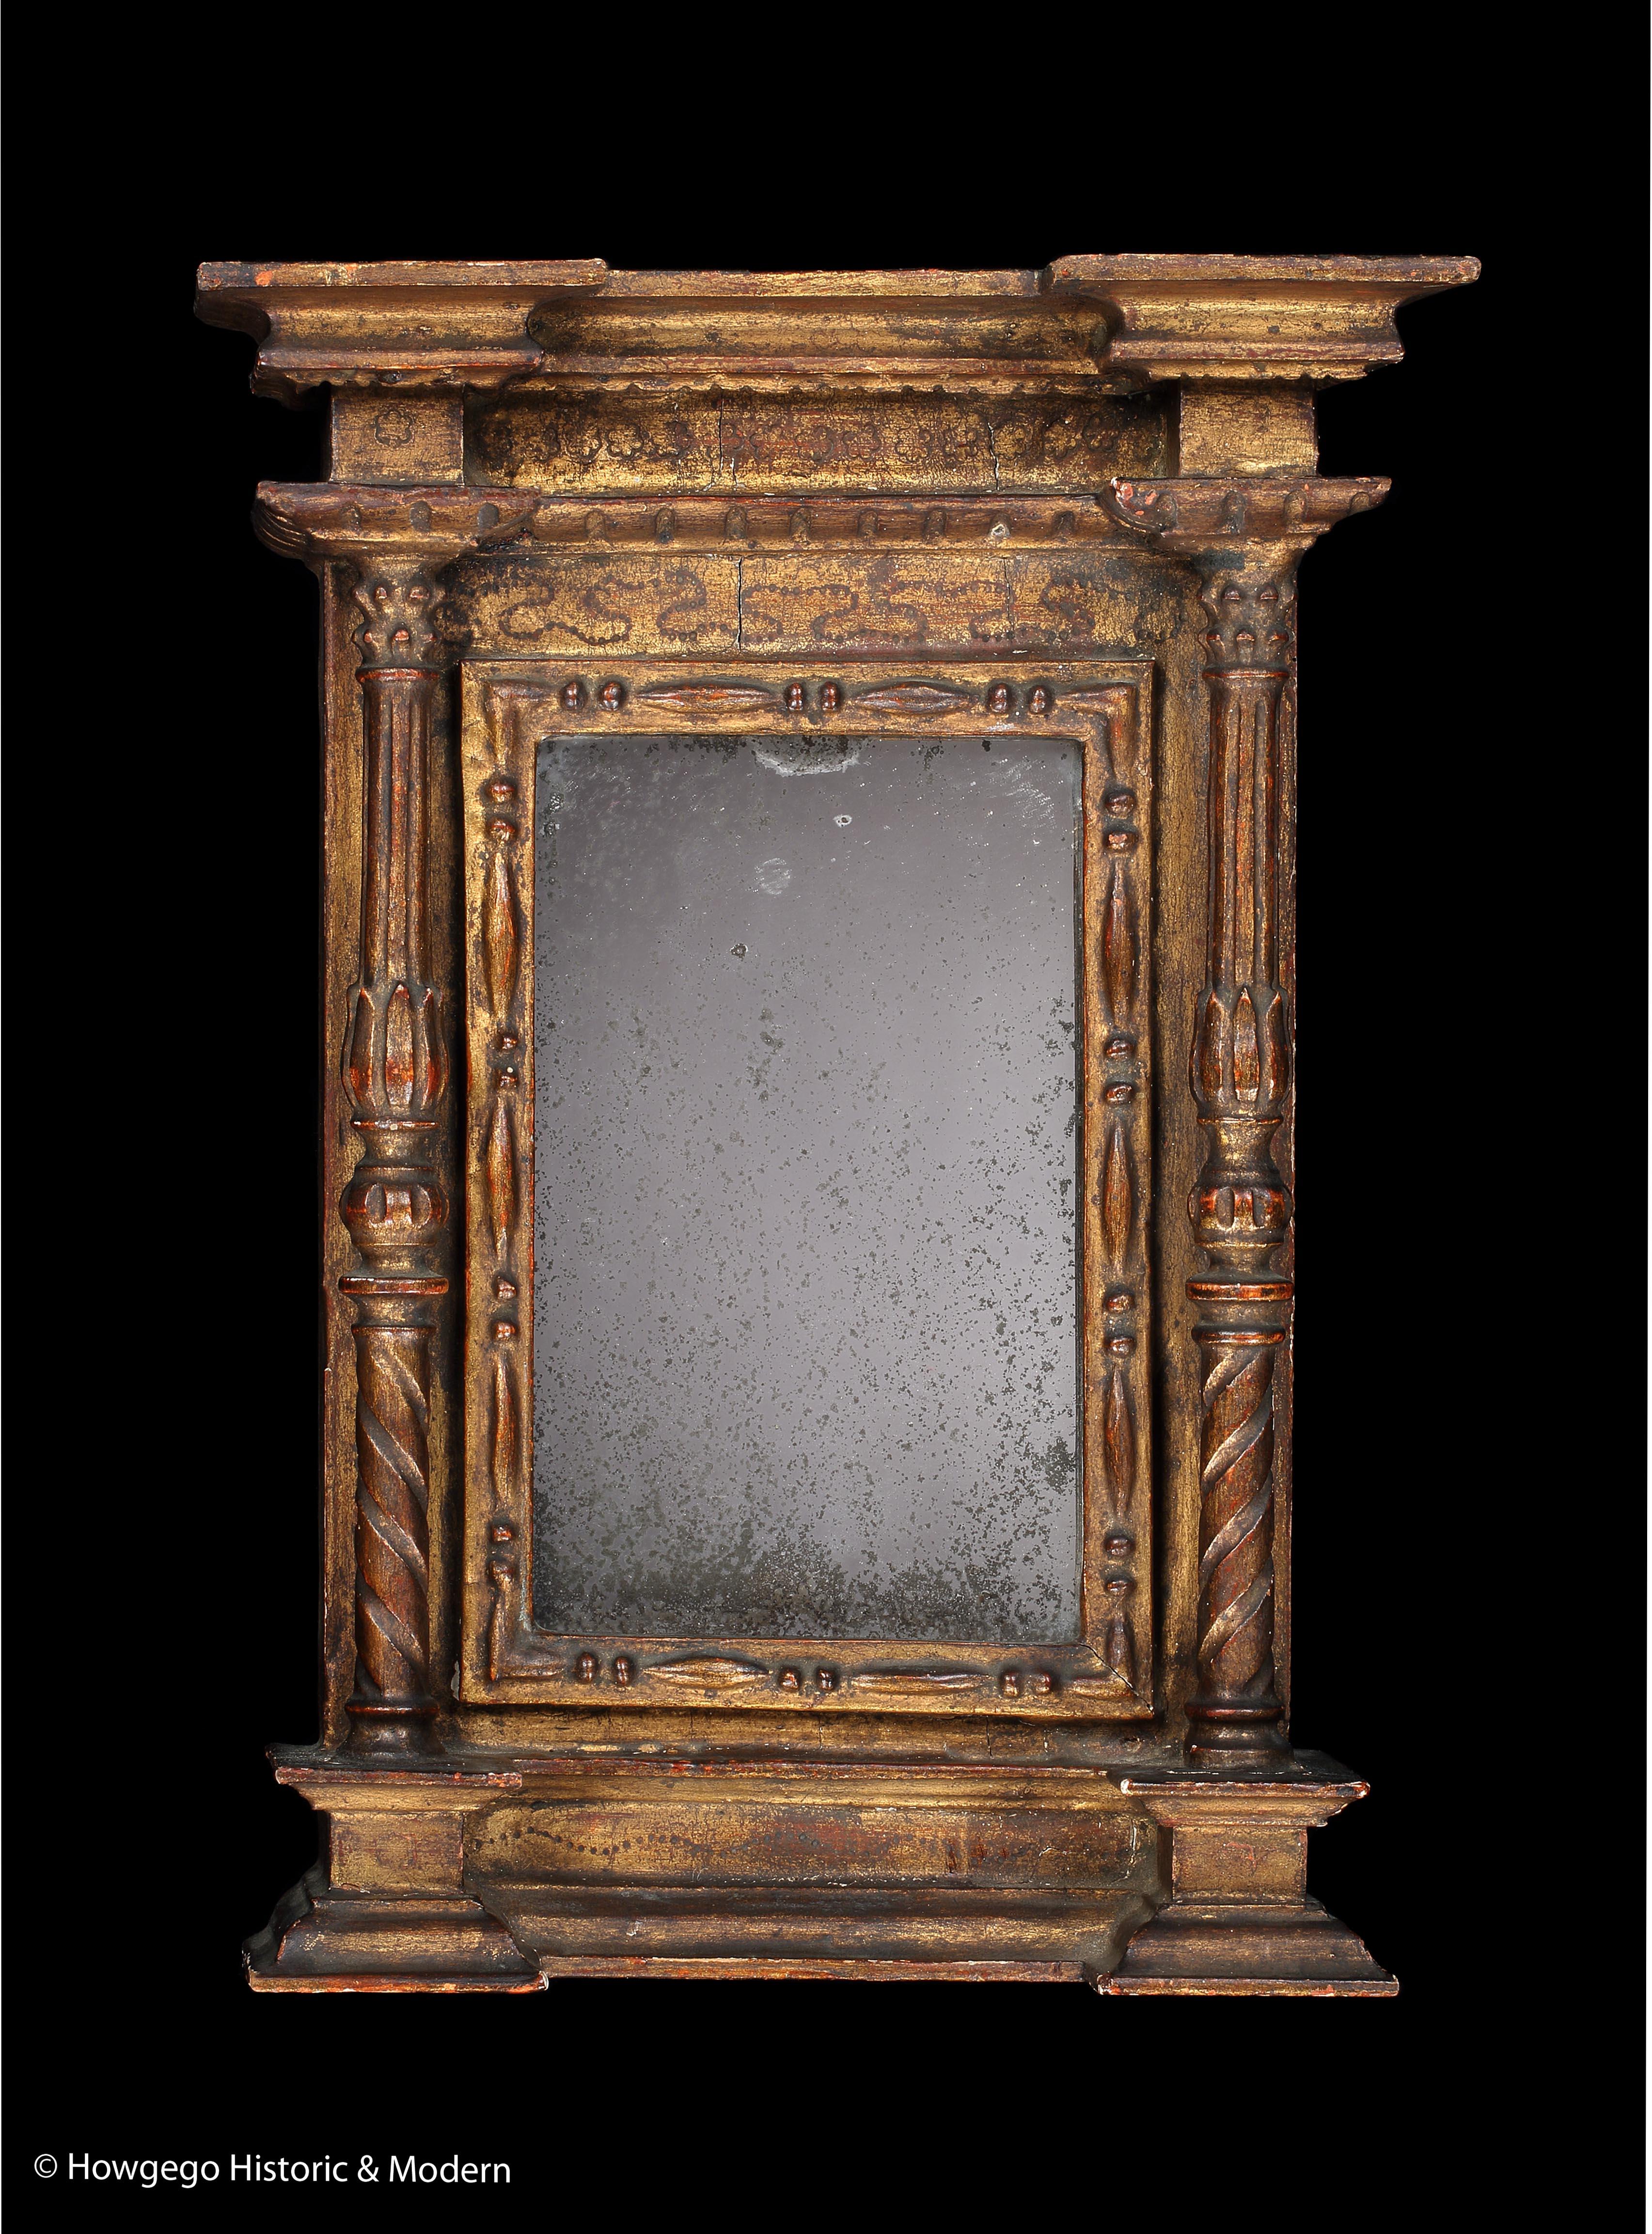 An exceptionally, rare, minature, late-18th century, Italian, gilded, neo-classical mirror

- Charming piece of exquisite proportions, displaying a variety of fine and characteristic, neo-classical ornament 
- Exceptionally, rare petite, size,